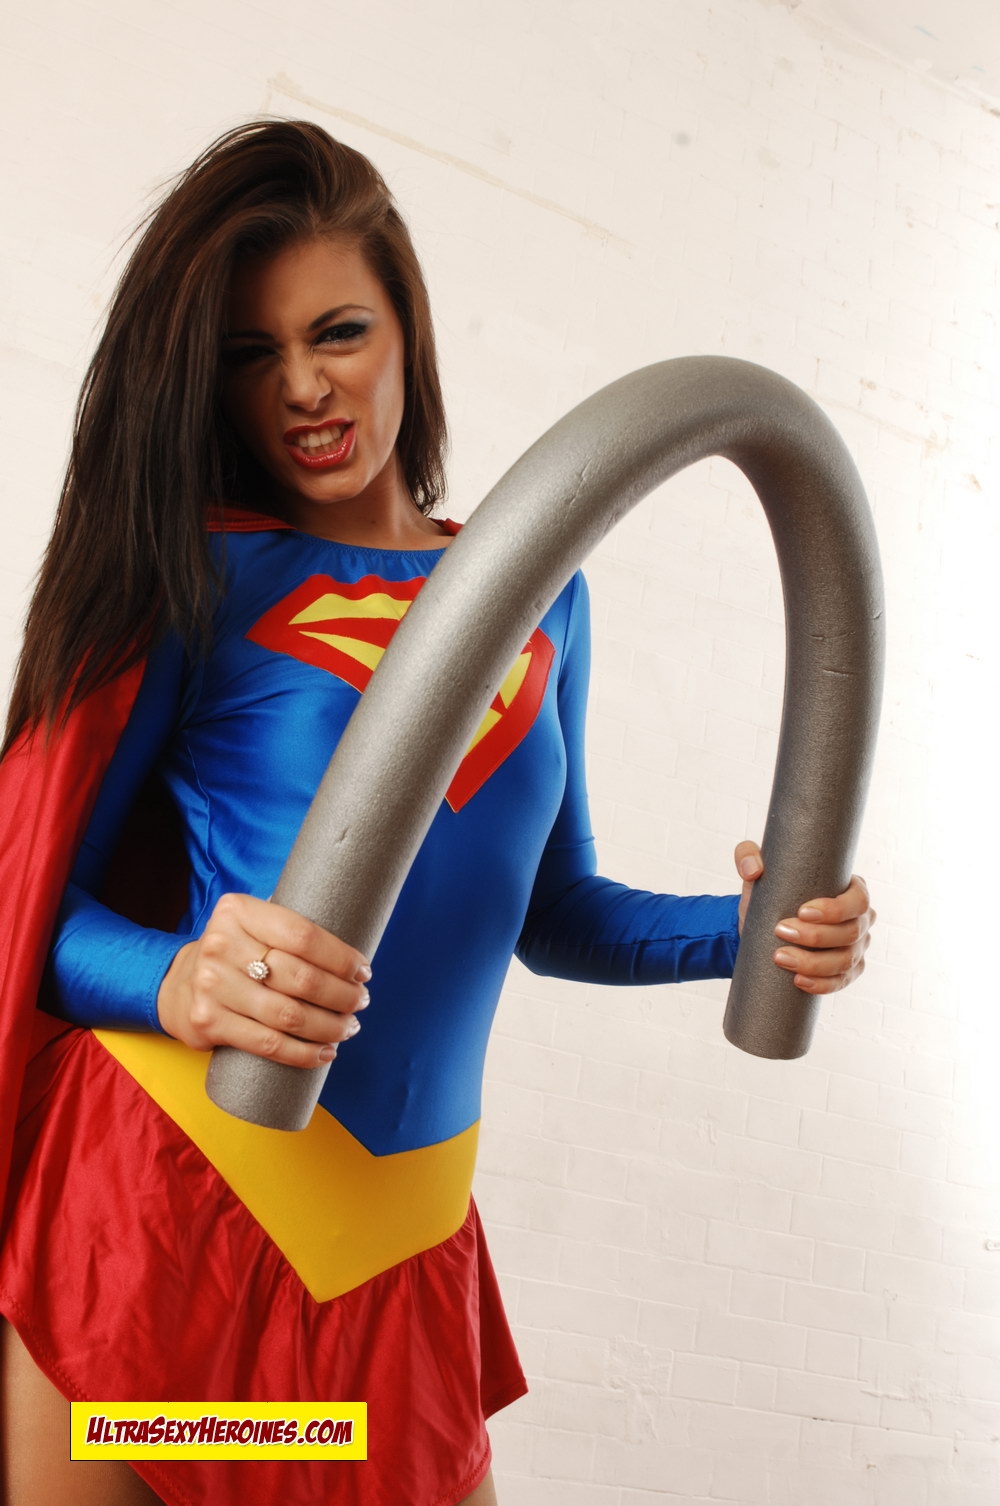 [UltraSexyHeroines] Super Heroine Cosplay Nude - Holly 78